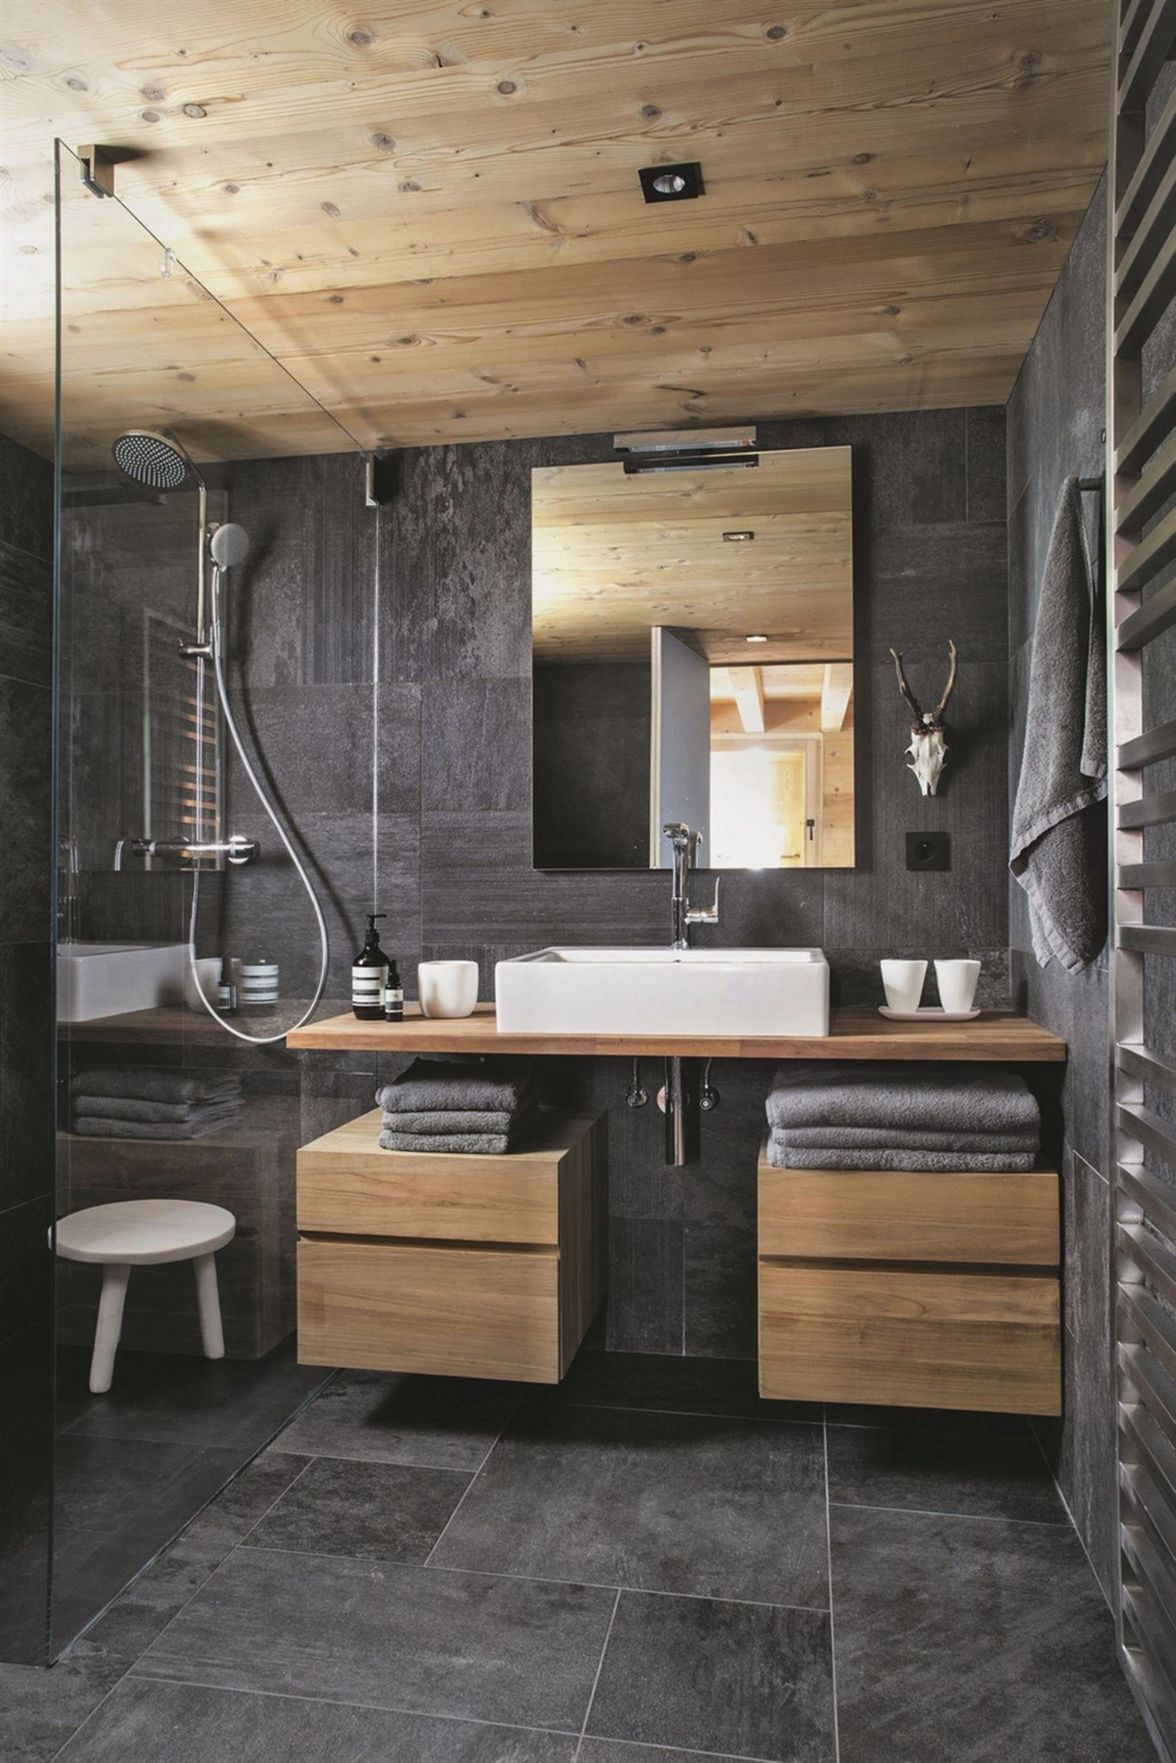 Gray and wood bathroom: ideas and tips for a refined decor